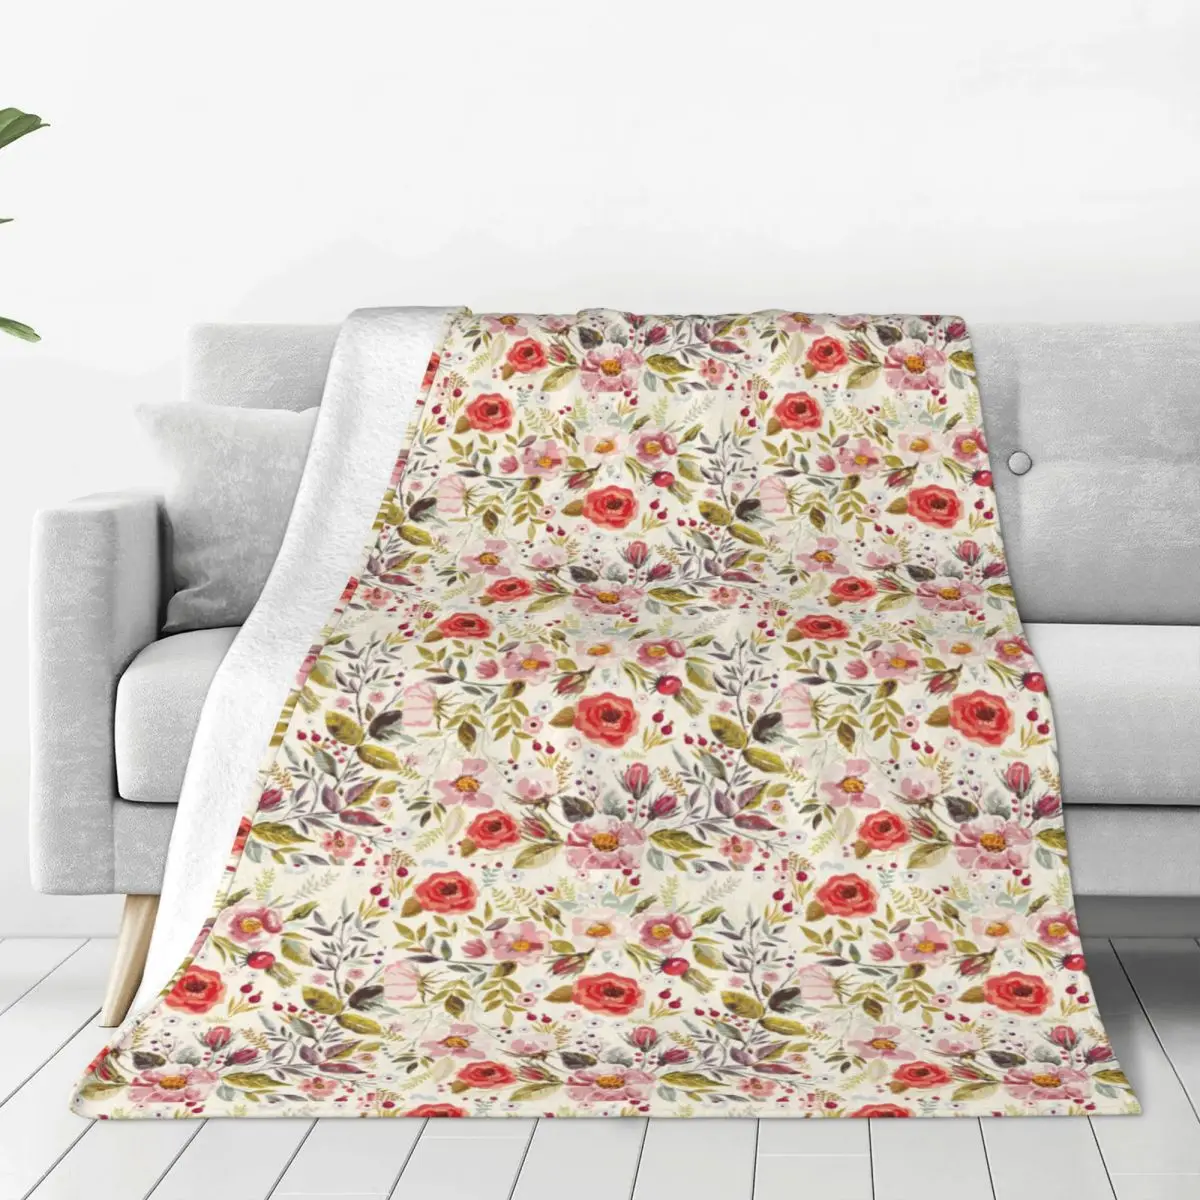 

Vintage Hand Drawn Floral Soft Fleece Throw Blanket Warm and Cozy Comfy Microfiber Blanket for Couch Sofa Bed 40"x30"